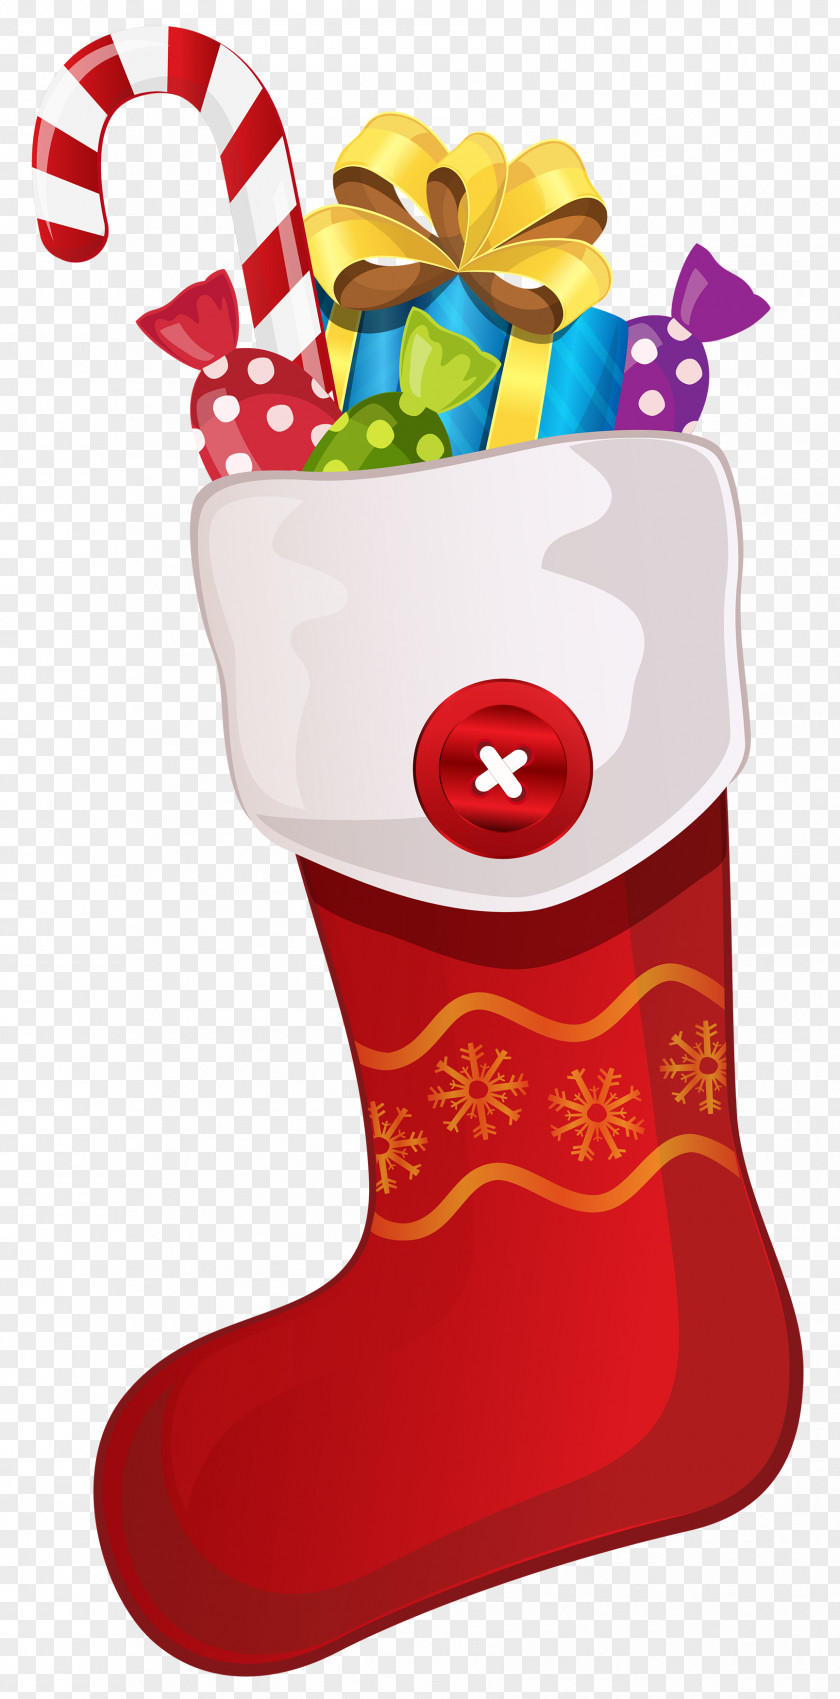 Stocking Cliparts Candy Cane Christmas Stockings Clip Art PNG